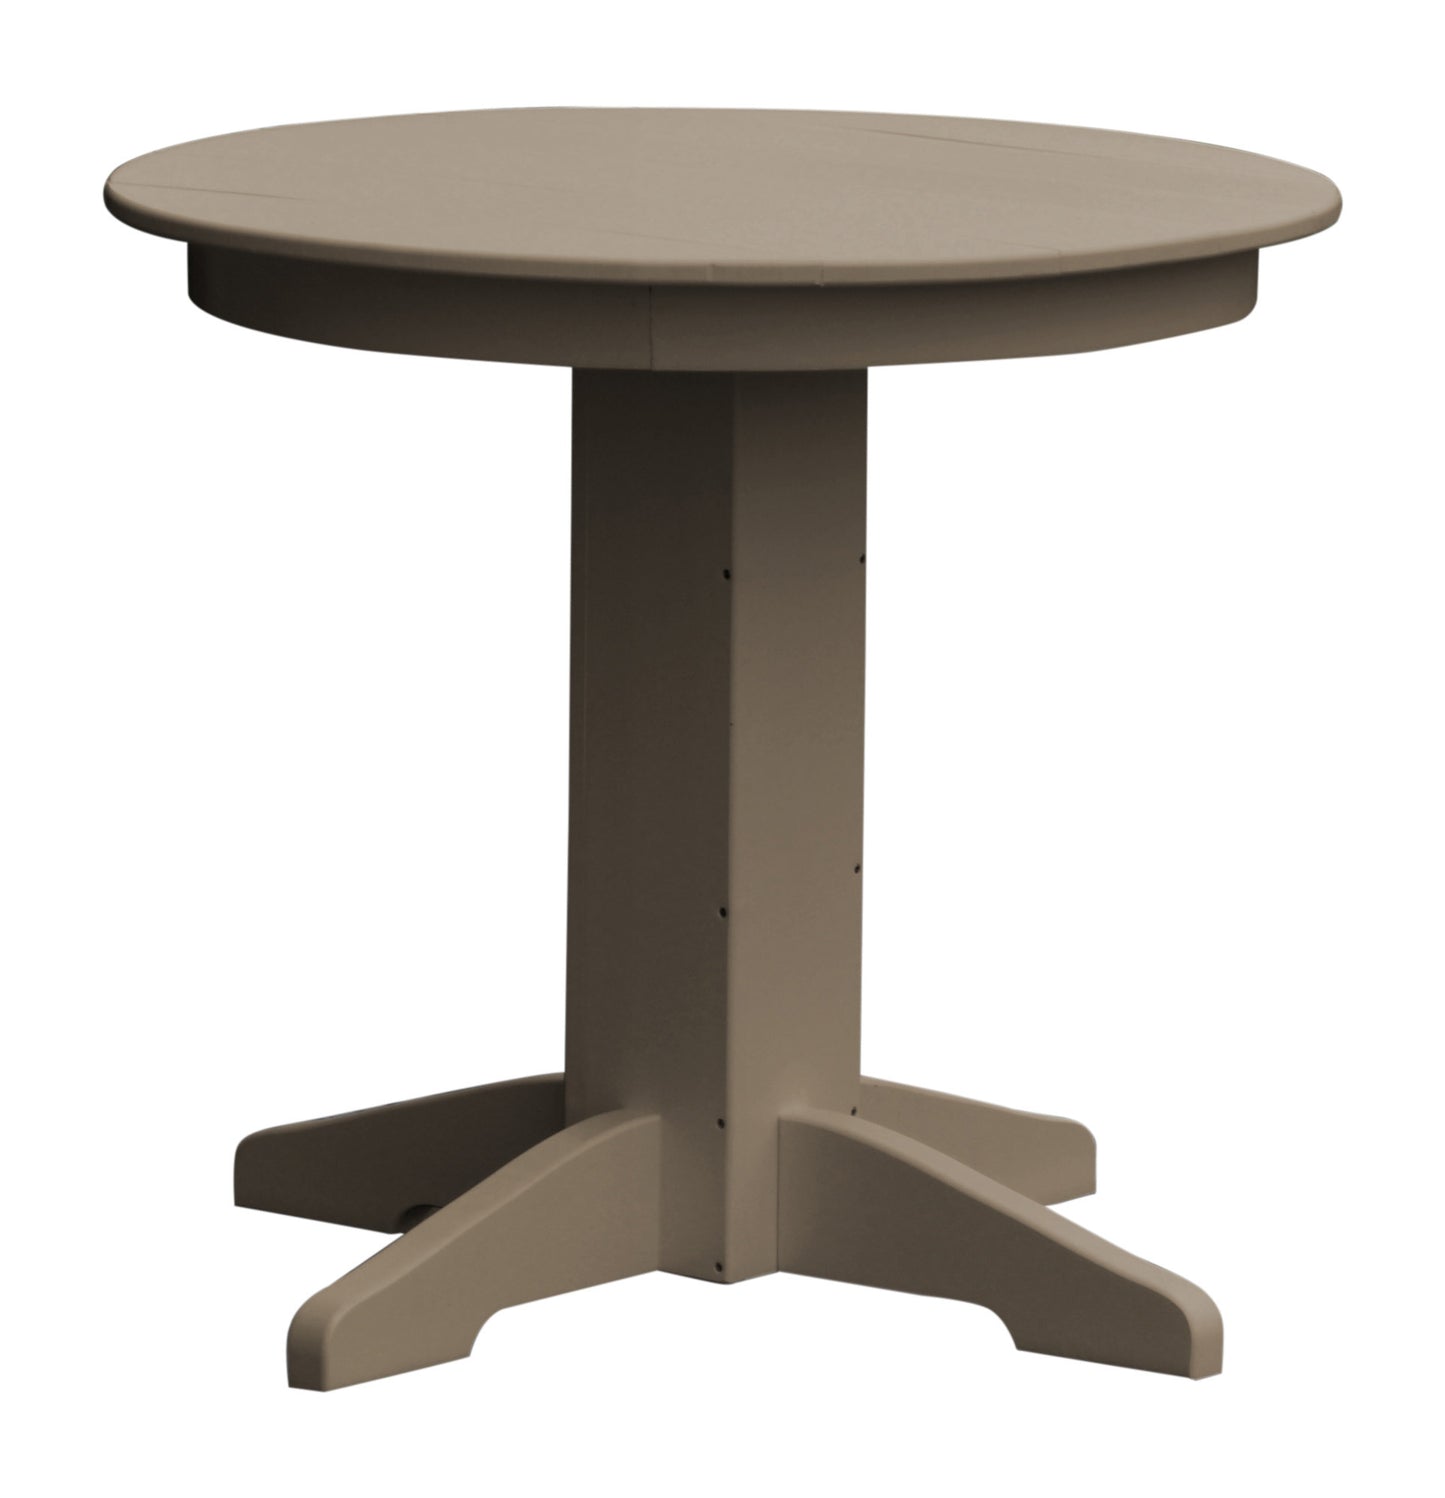 A&L Furniture Recycled Plastic 33" Round Dining Table - Weatheredwood